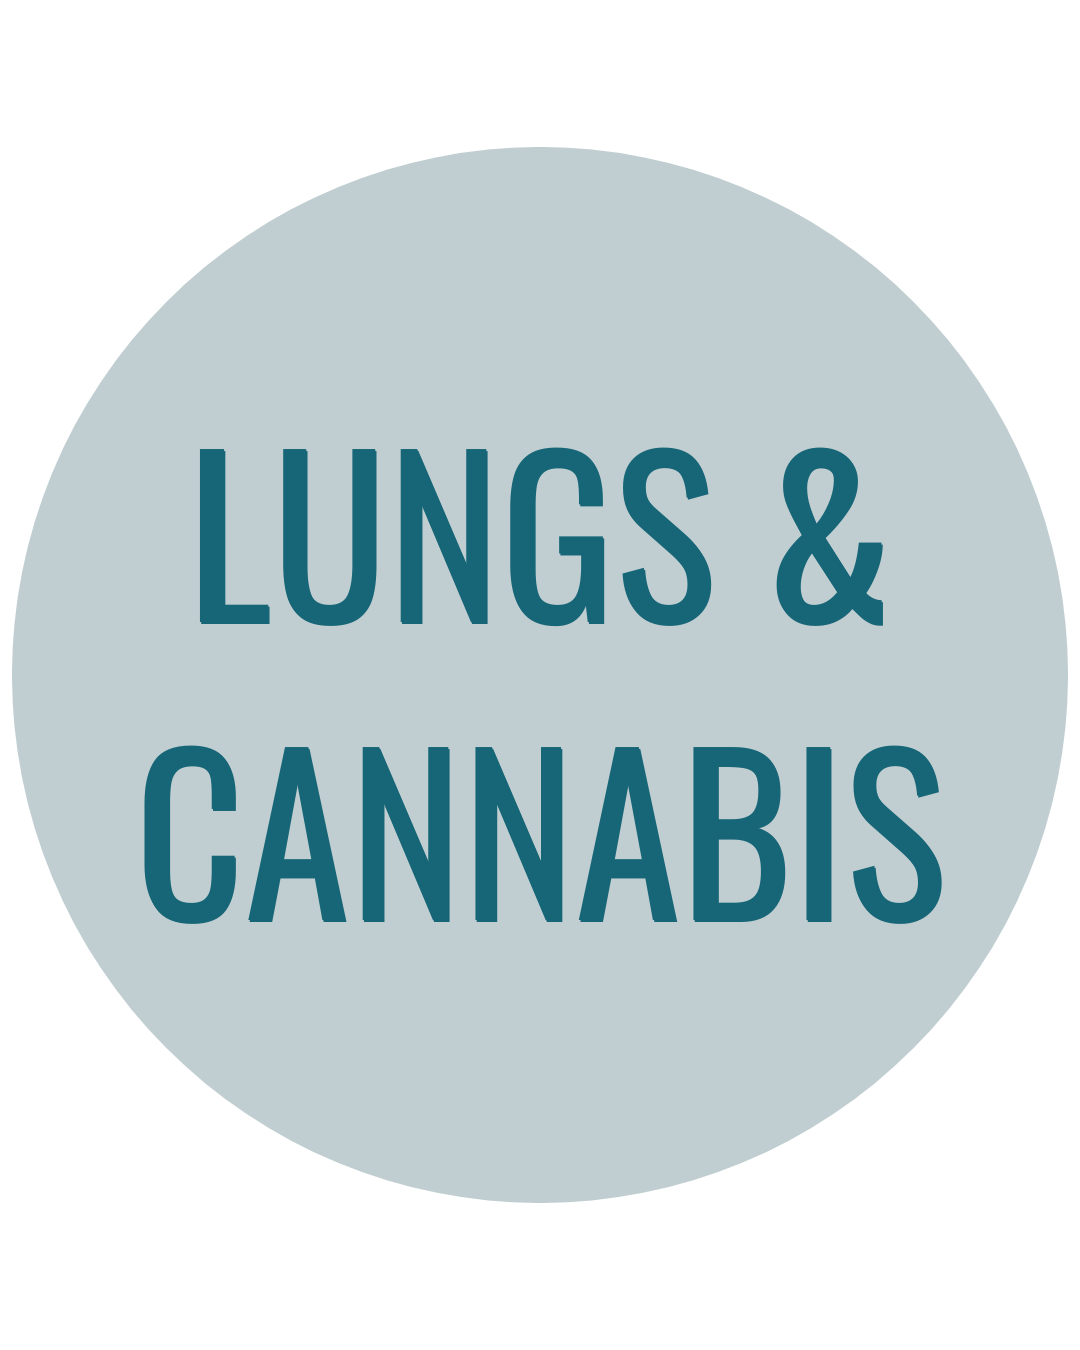 The Lungs and Cannabis